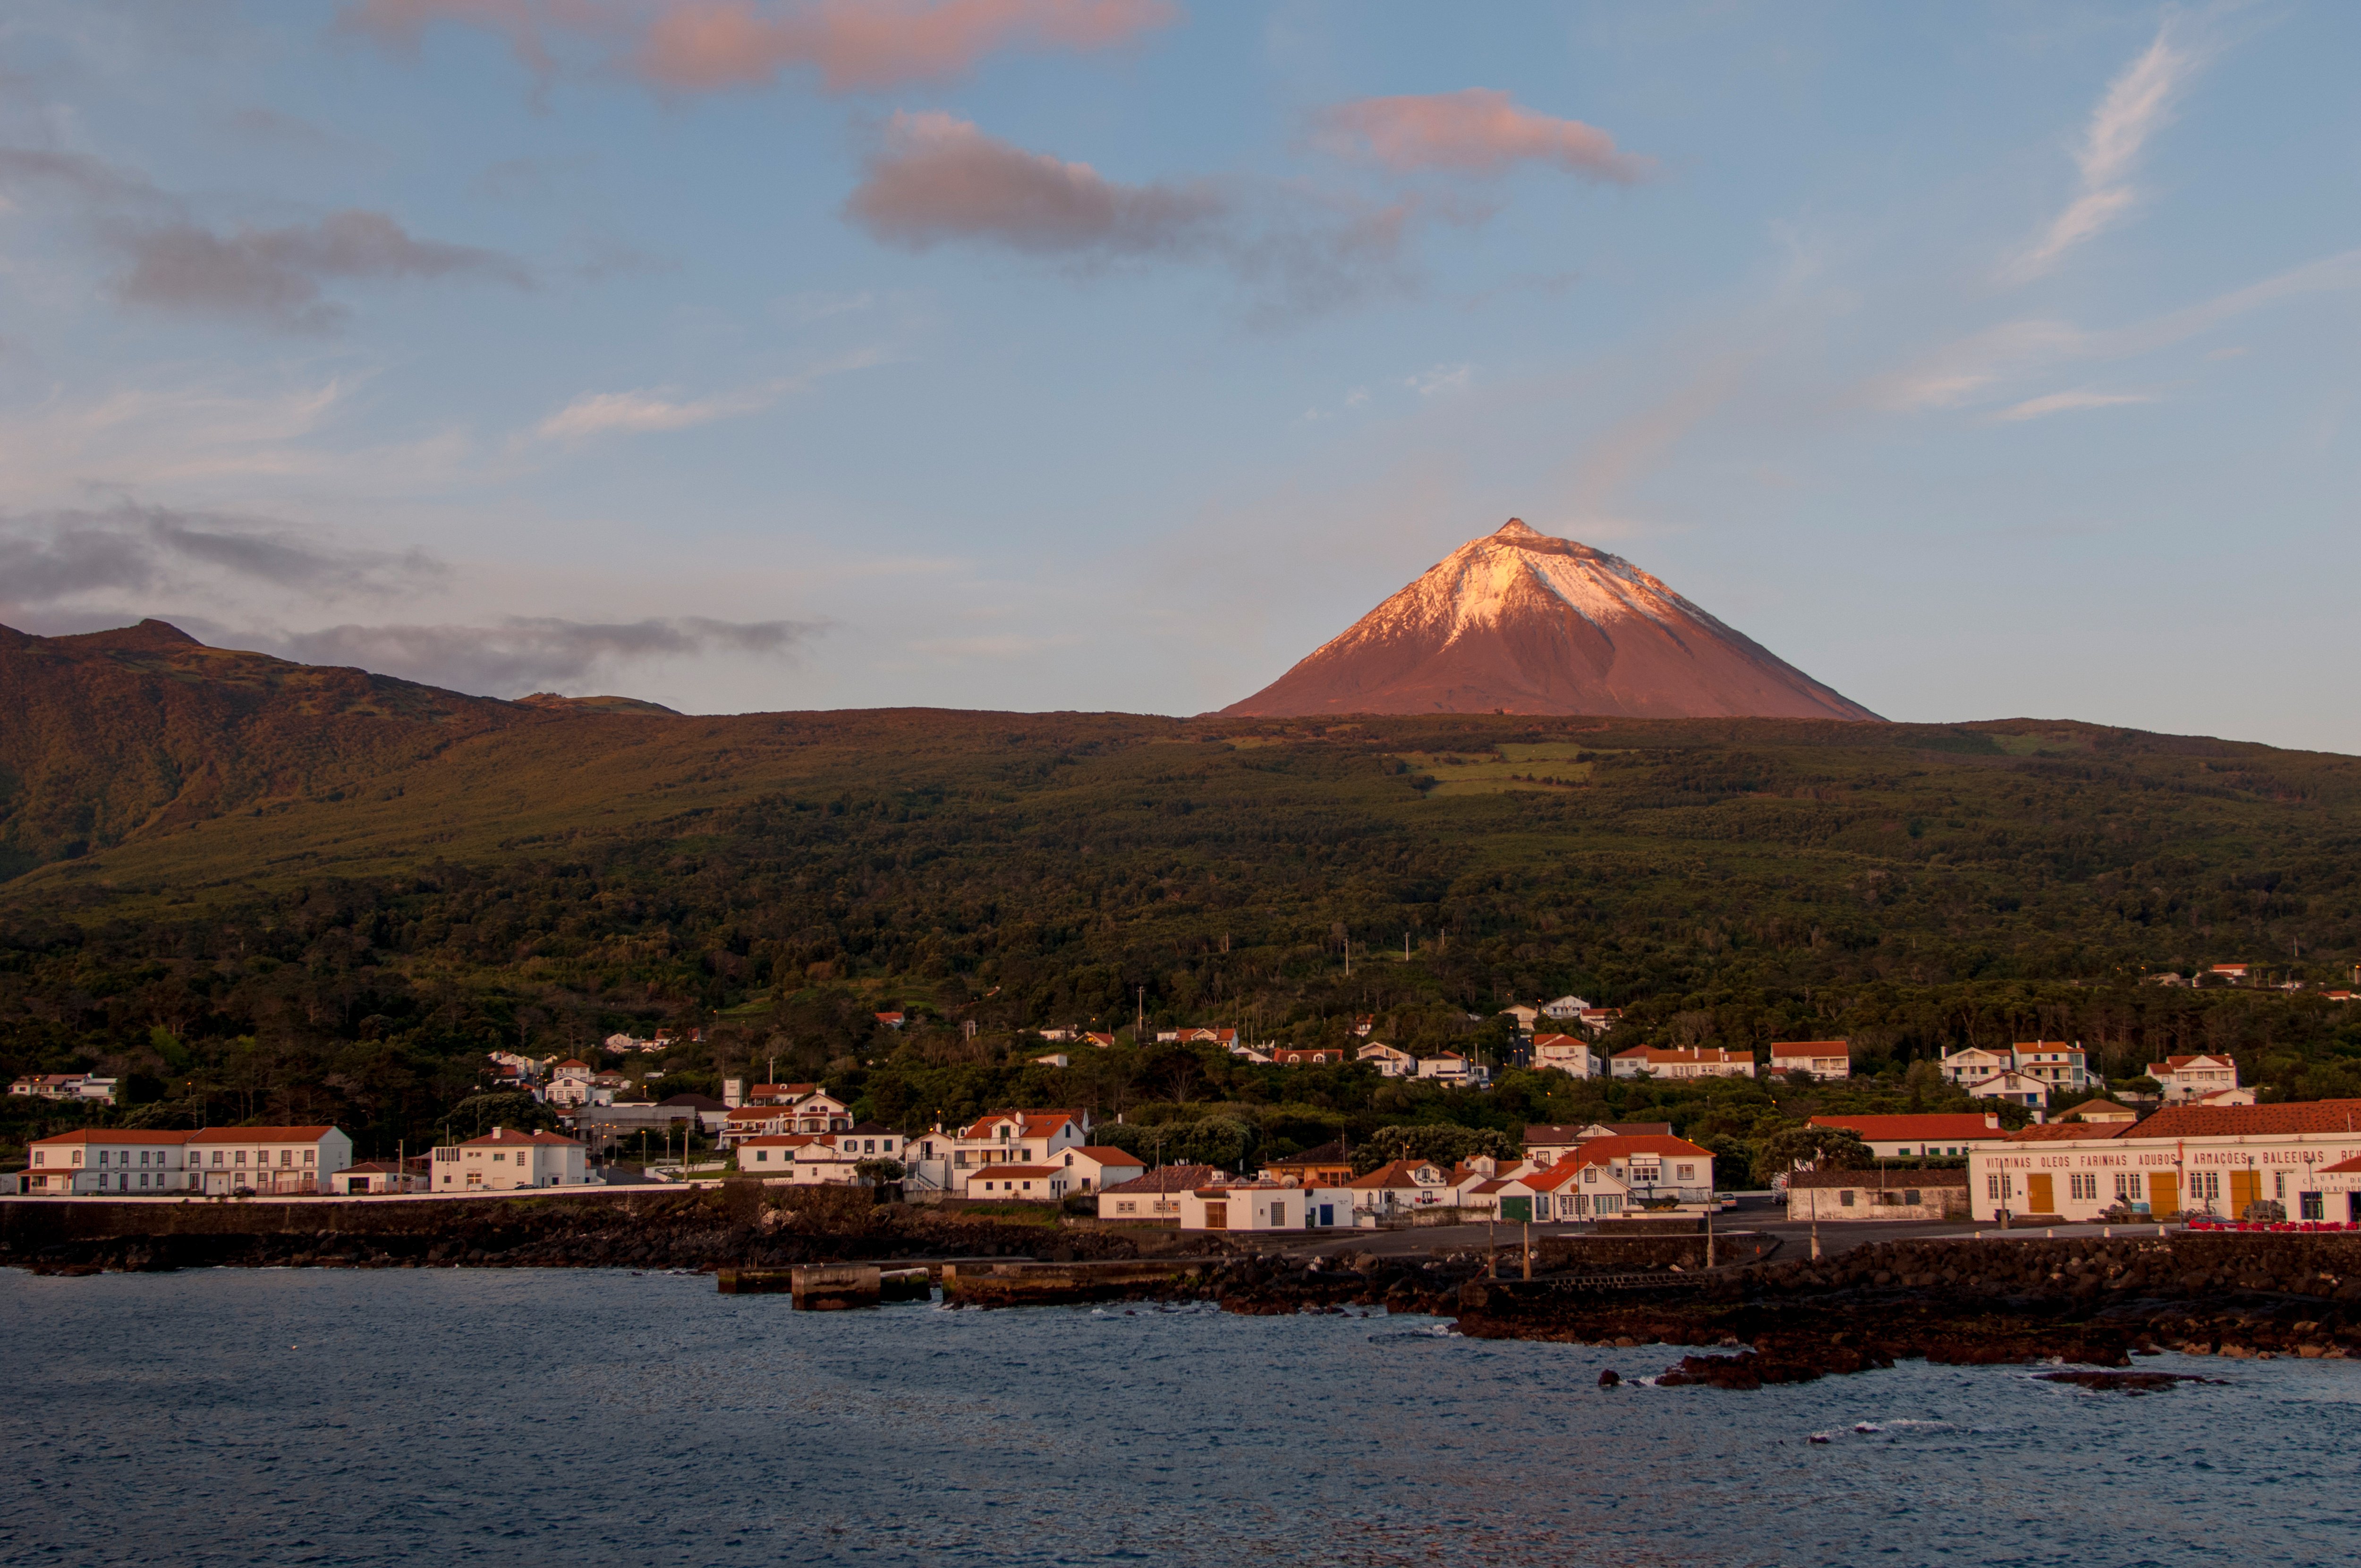 View from a ship of Sao Roque do Pico on Pico Island in the